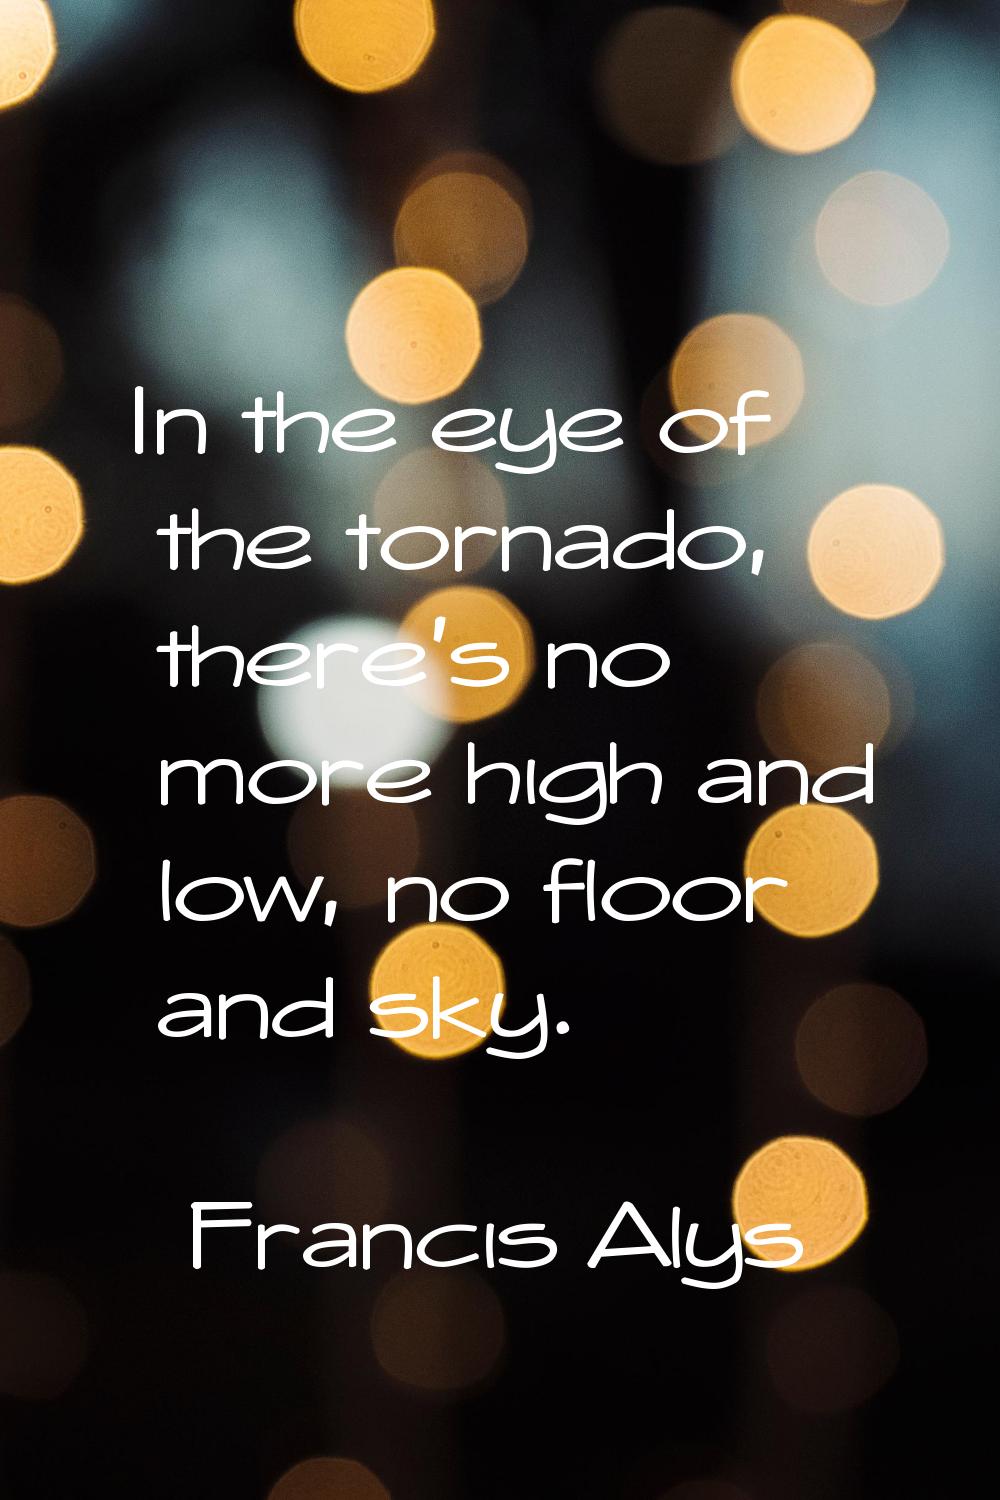 In the eye of the tornado, there's no more high and low, no floor and sky.